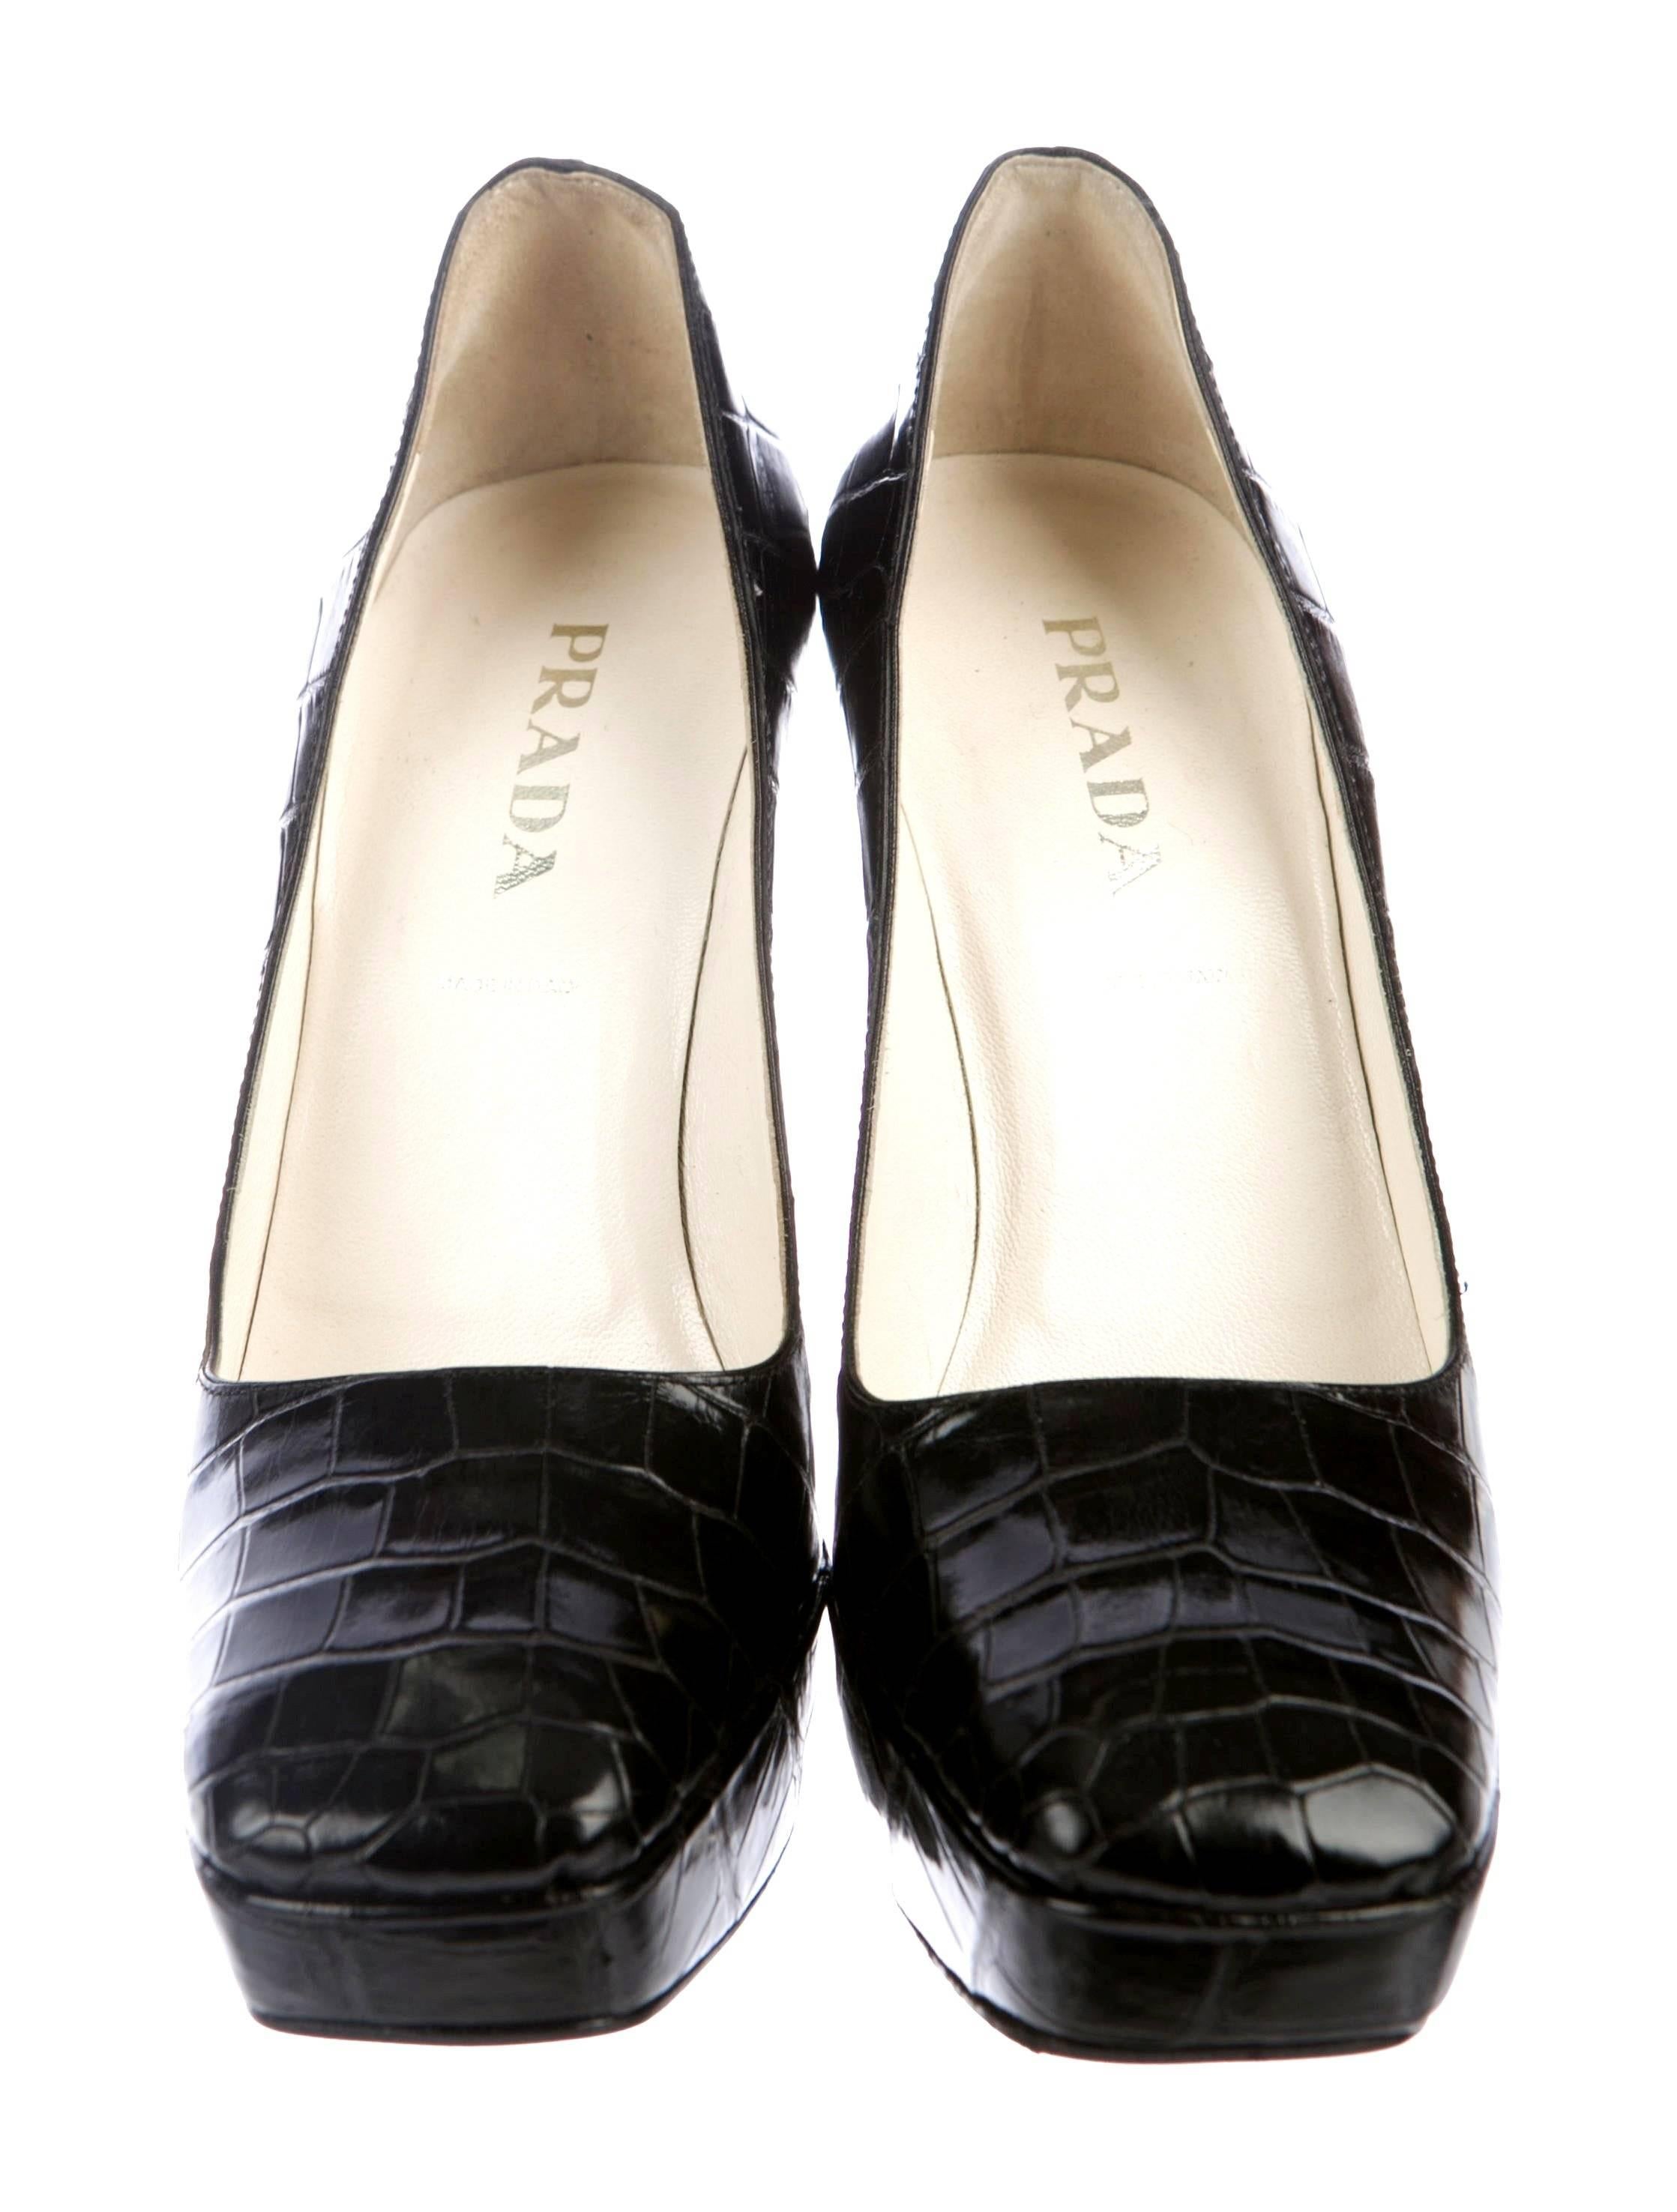 
    A PRADA signature piece that will last you for years
    Pure luxury! A real statement piece
    With platform and very high heels - for ultra-long legs!
The most luxurious skin you can find on earth - shiny, thick, black leather - just